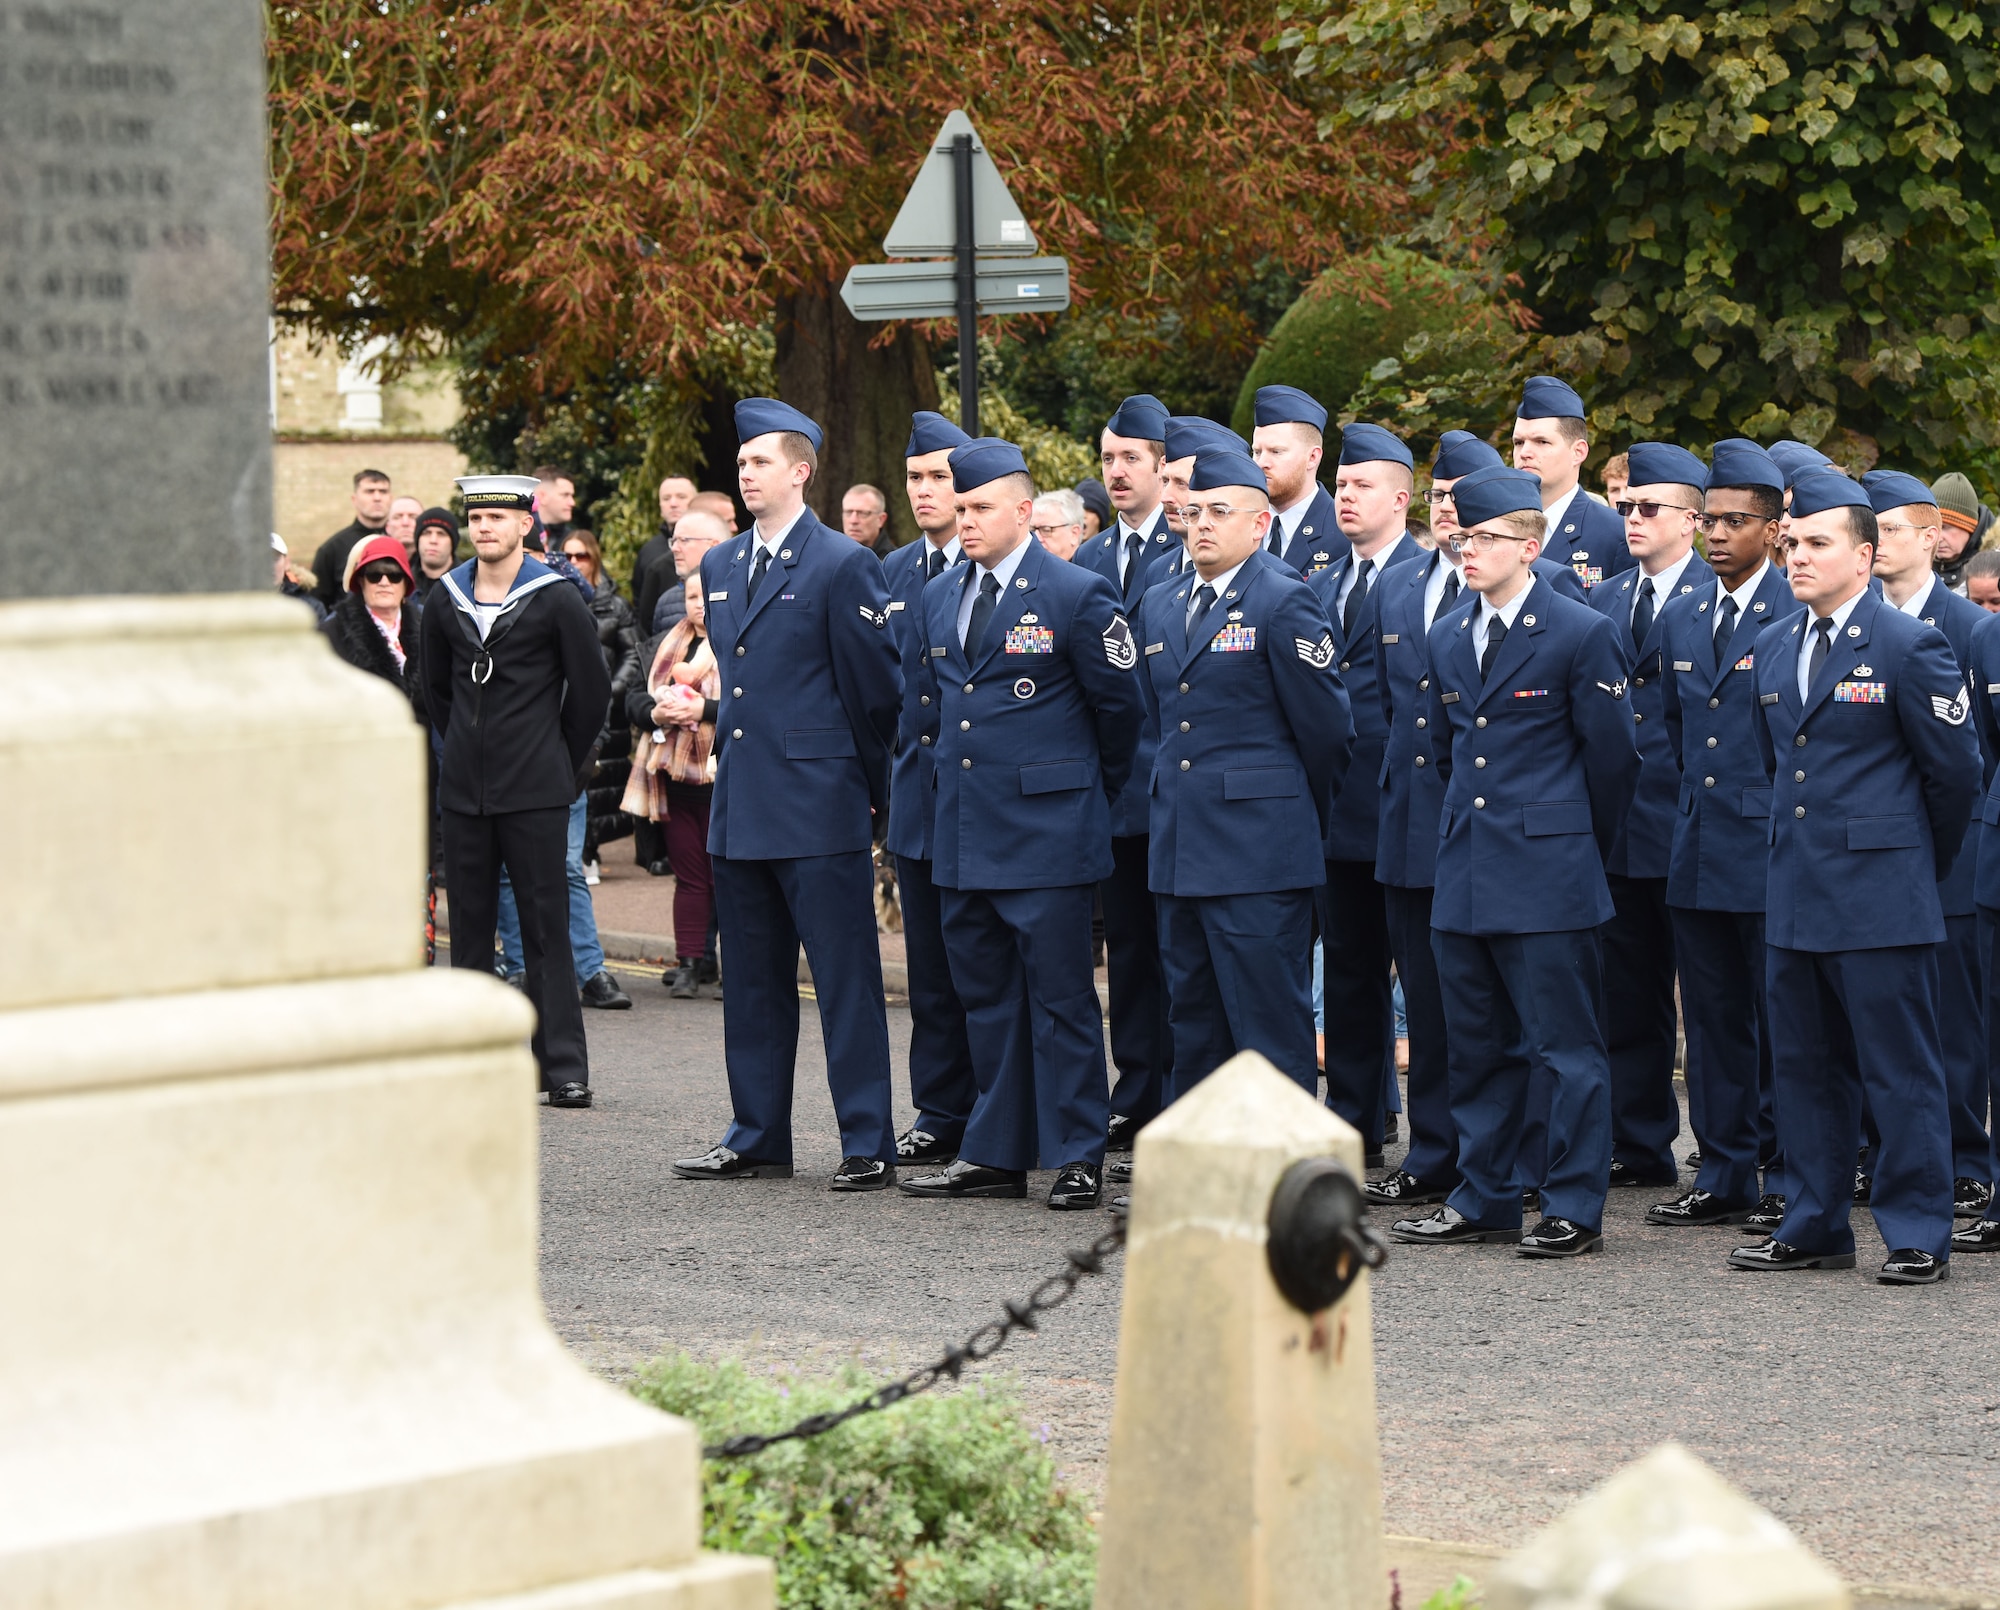 U.S. Airmen from the 100th Maintenance Group stand in formation at the war memorial during a Remembrance Sunday parade, alongside Royal British Legion members and other groups from the local community in Mildenhall, Suffolk, England, Nov. 12, 2023. Two minutes of silence were observed immediately after the playing of “The Last Post,” followed by Reveille. Team Mildenhall Airmen participated in Remembrance Sunday parades throughout the local area and East Anglia. (U.S. Air Force photo by Karen Abeyasekere)